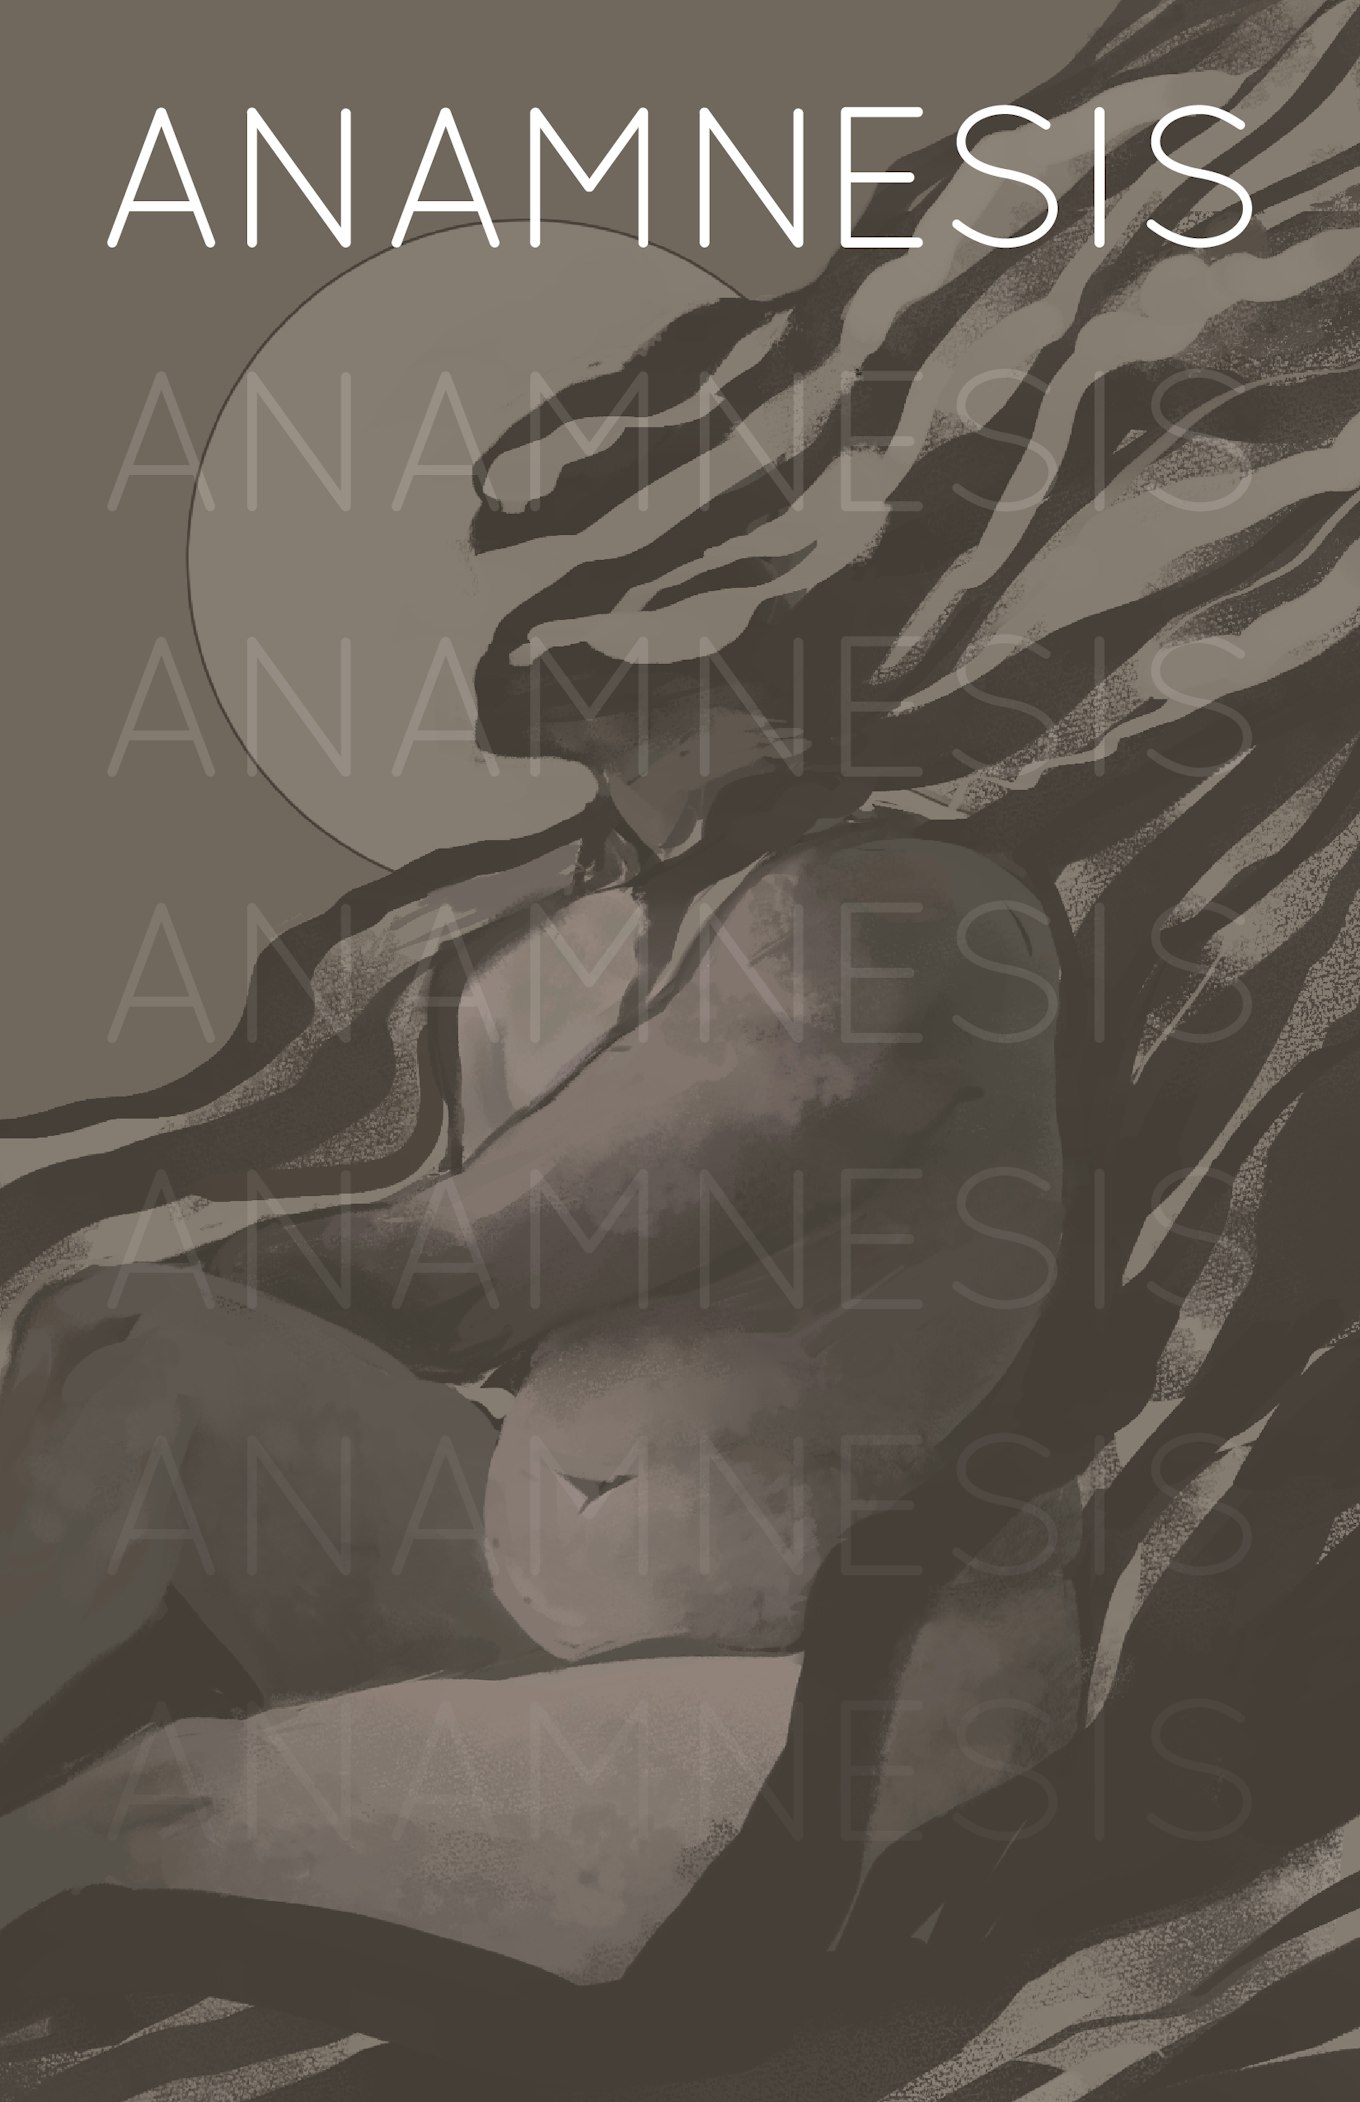 The cover art for Anamnesis, all in shades of brown. Shows a nude figure sitting down, surrounded by wisps that could be smoke or fog. The figure's head is entirely obscured by the wisps. The top of the page says the title Anamnesis in white. The title repeats down the cover, slowly fading until the last repetition is hard to see.